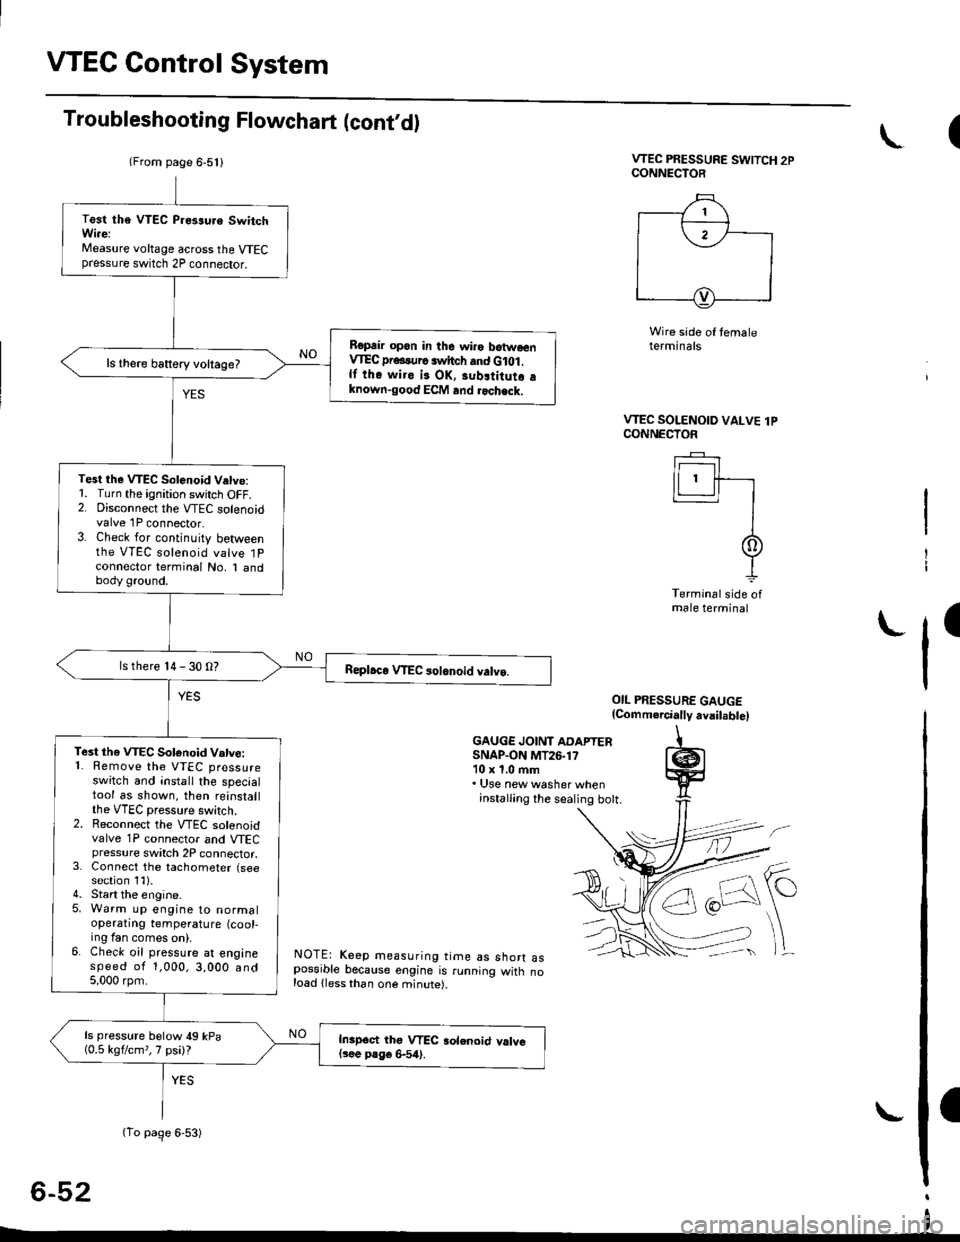 HONDA CIVIC 1996 6.G Workshop Manual VTEC Control System
Troubleshooting Flowchart (cont,d)
VTEC PRESSURE SWITCH 2PCONNECTOR
Wire side of temaleterminals
OIL PRESSURE GAUGE(Comm.rcially avail.bte)
GAUGE JOINT ADAPTERSNAP.ON MT26.1710 x 1